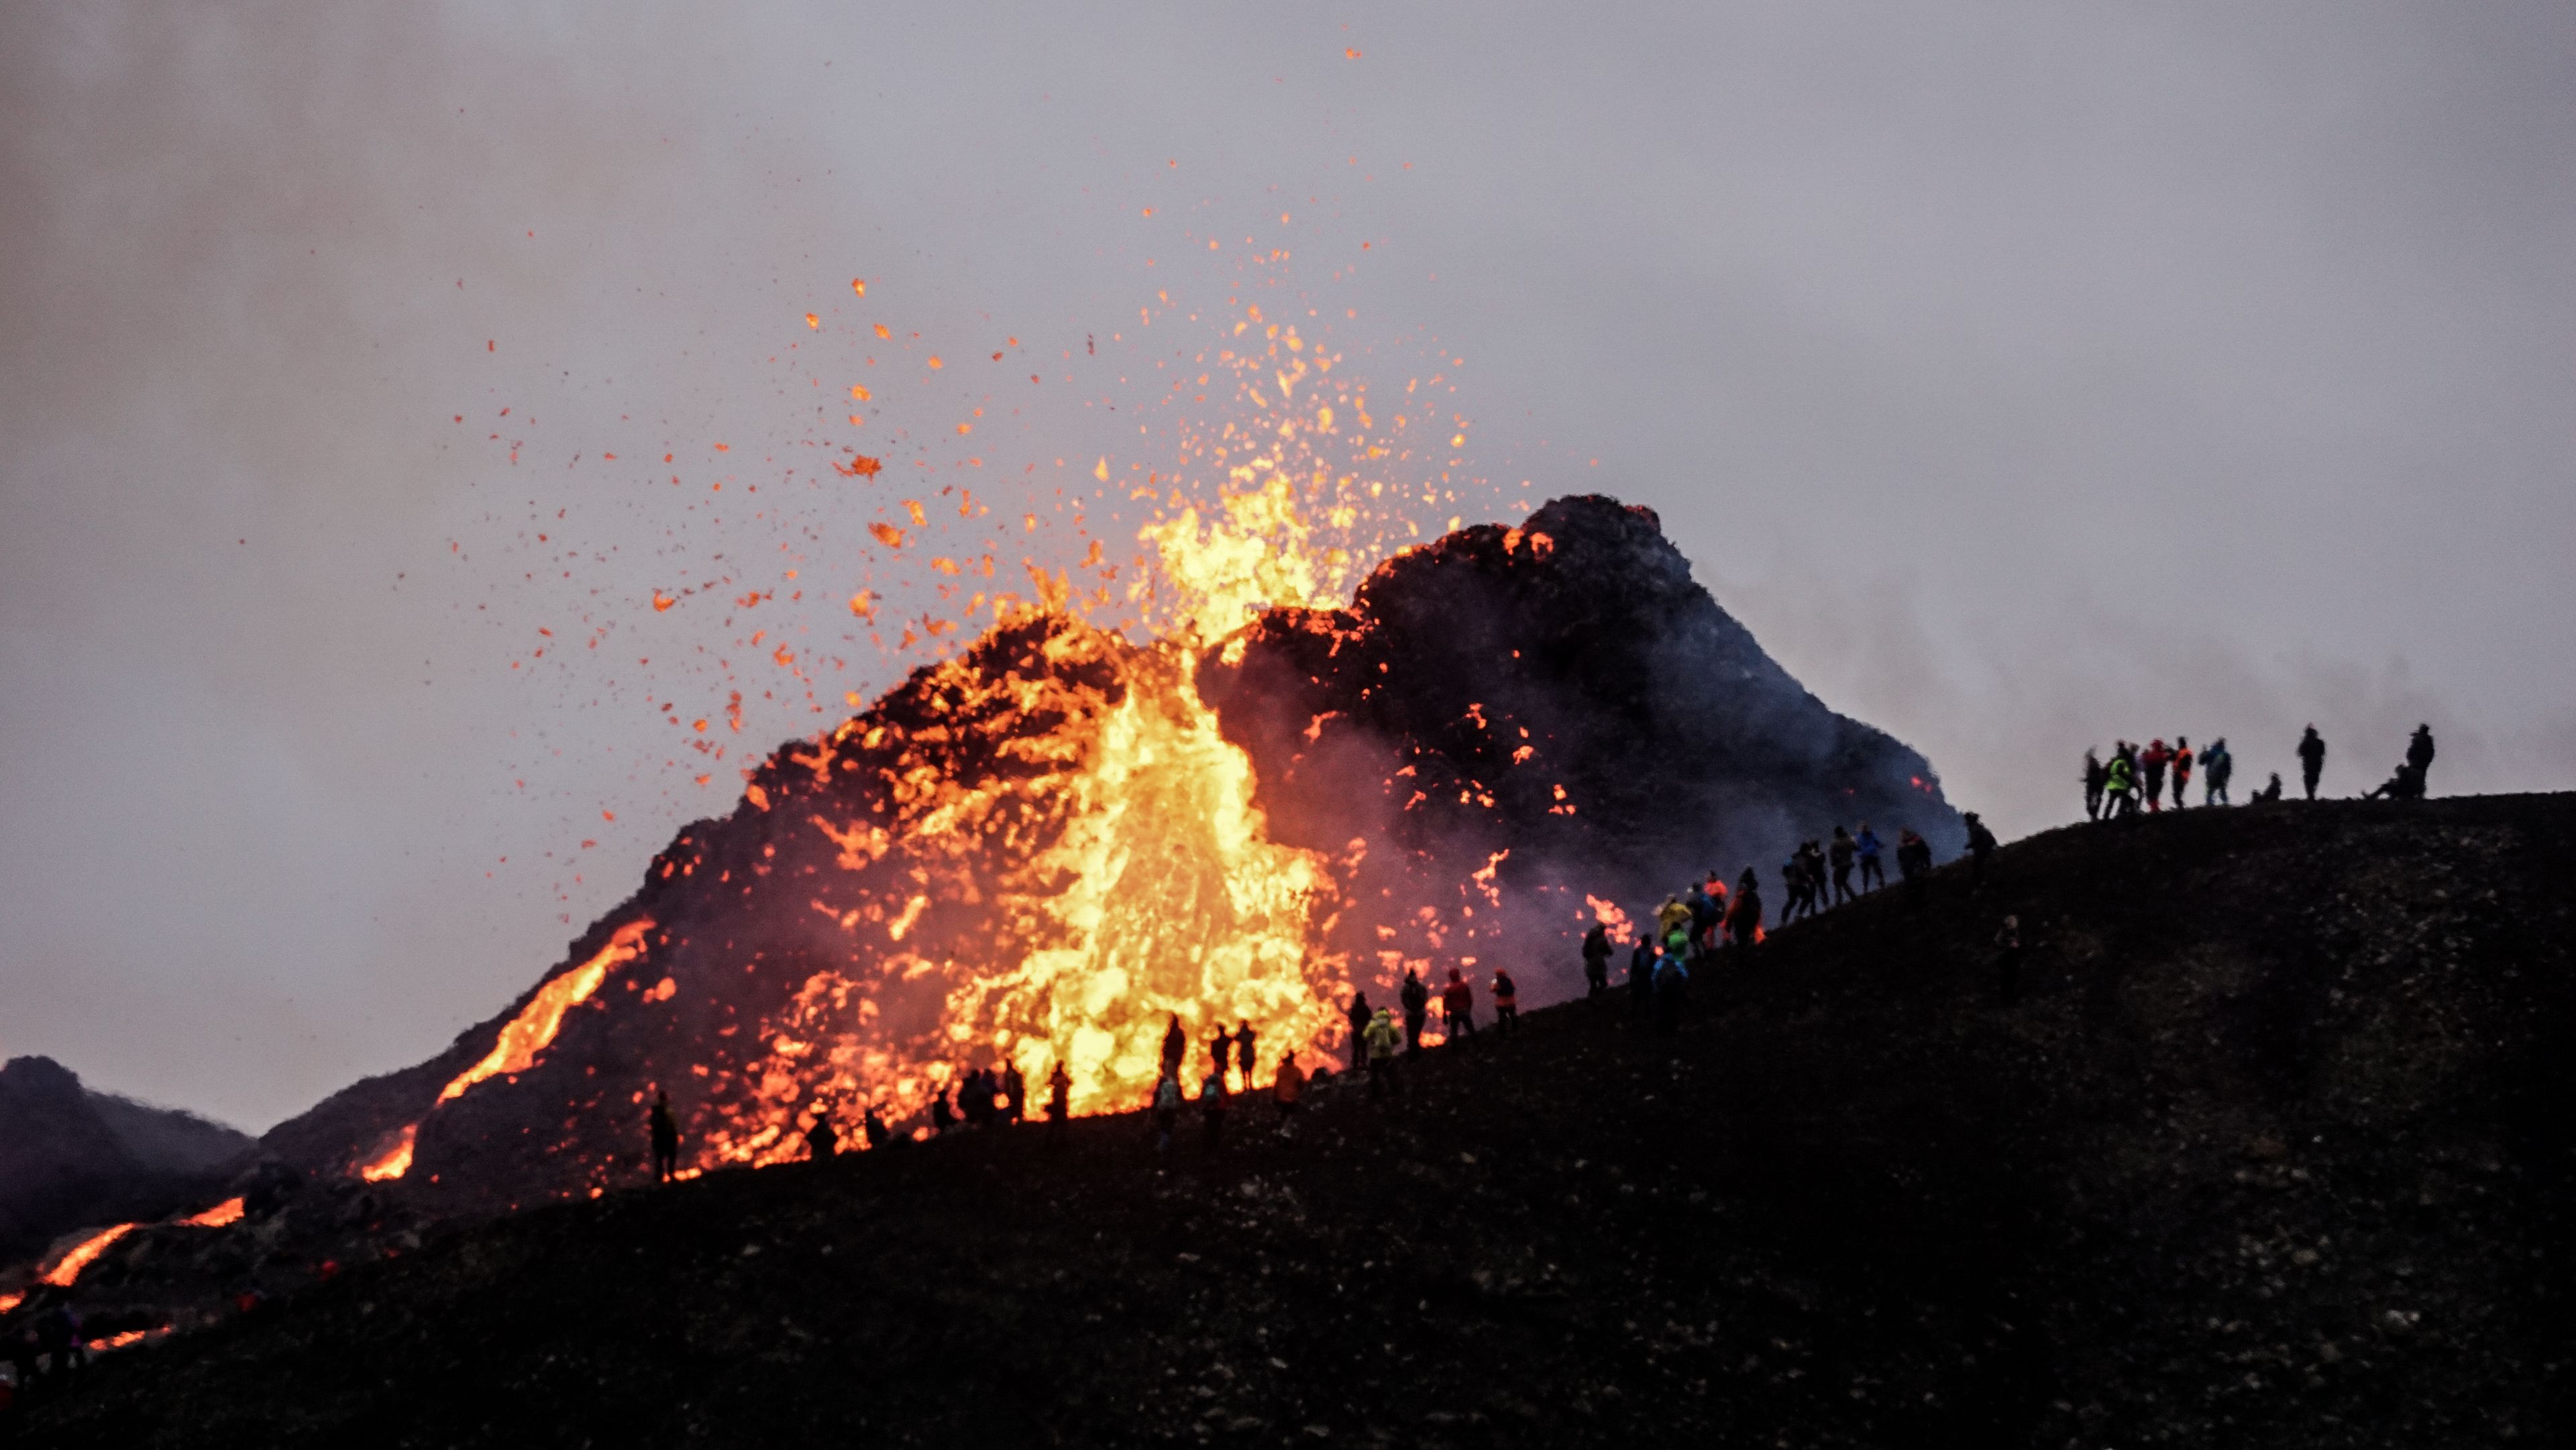 A view of Fagradalsfjall volcano with gases rising from the eruption site